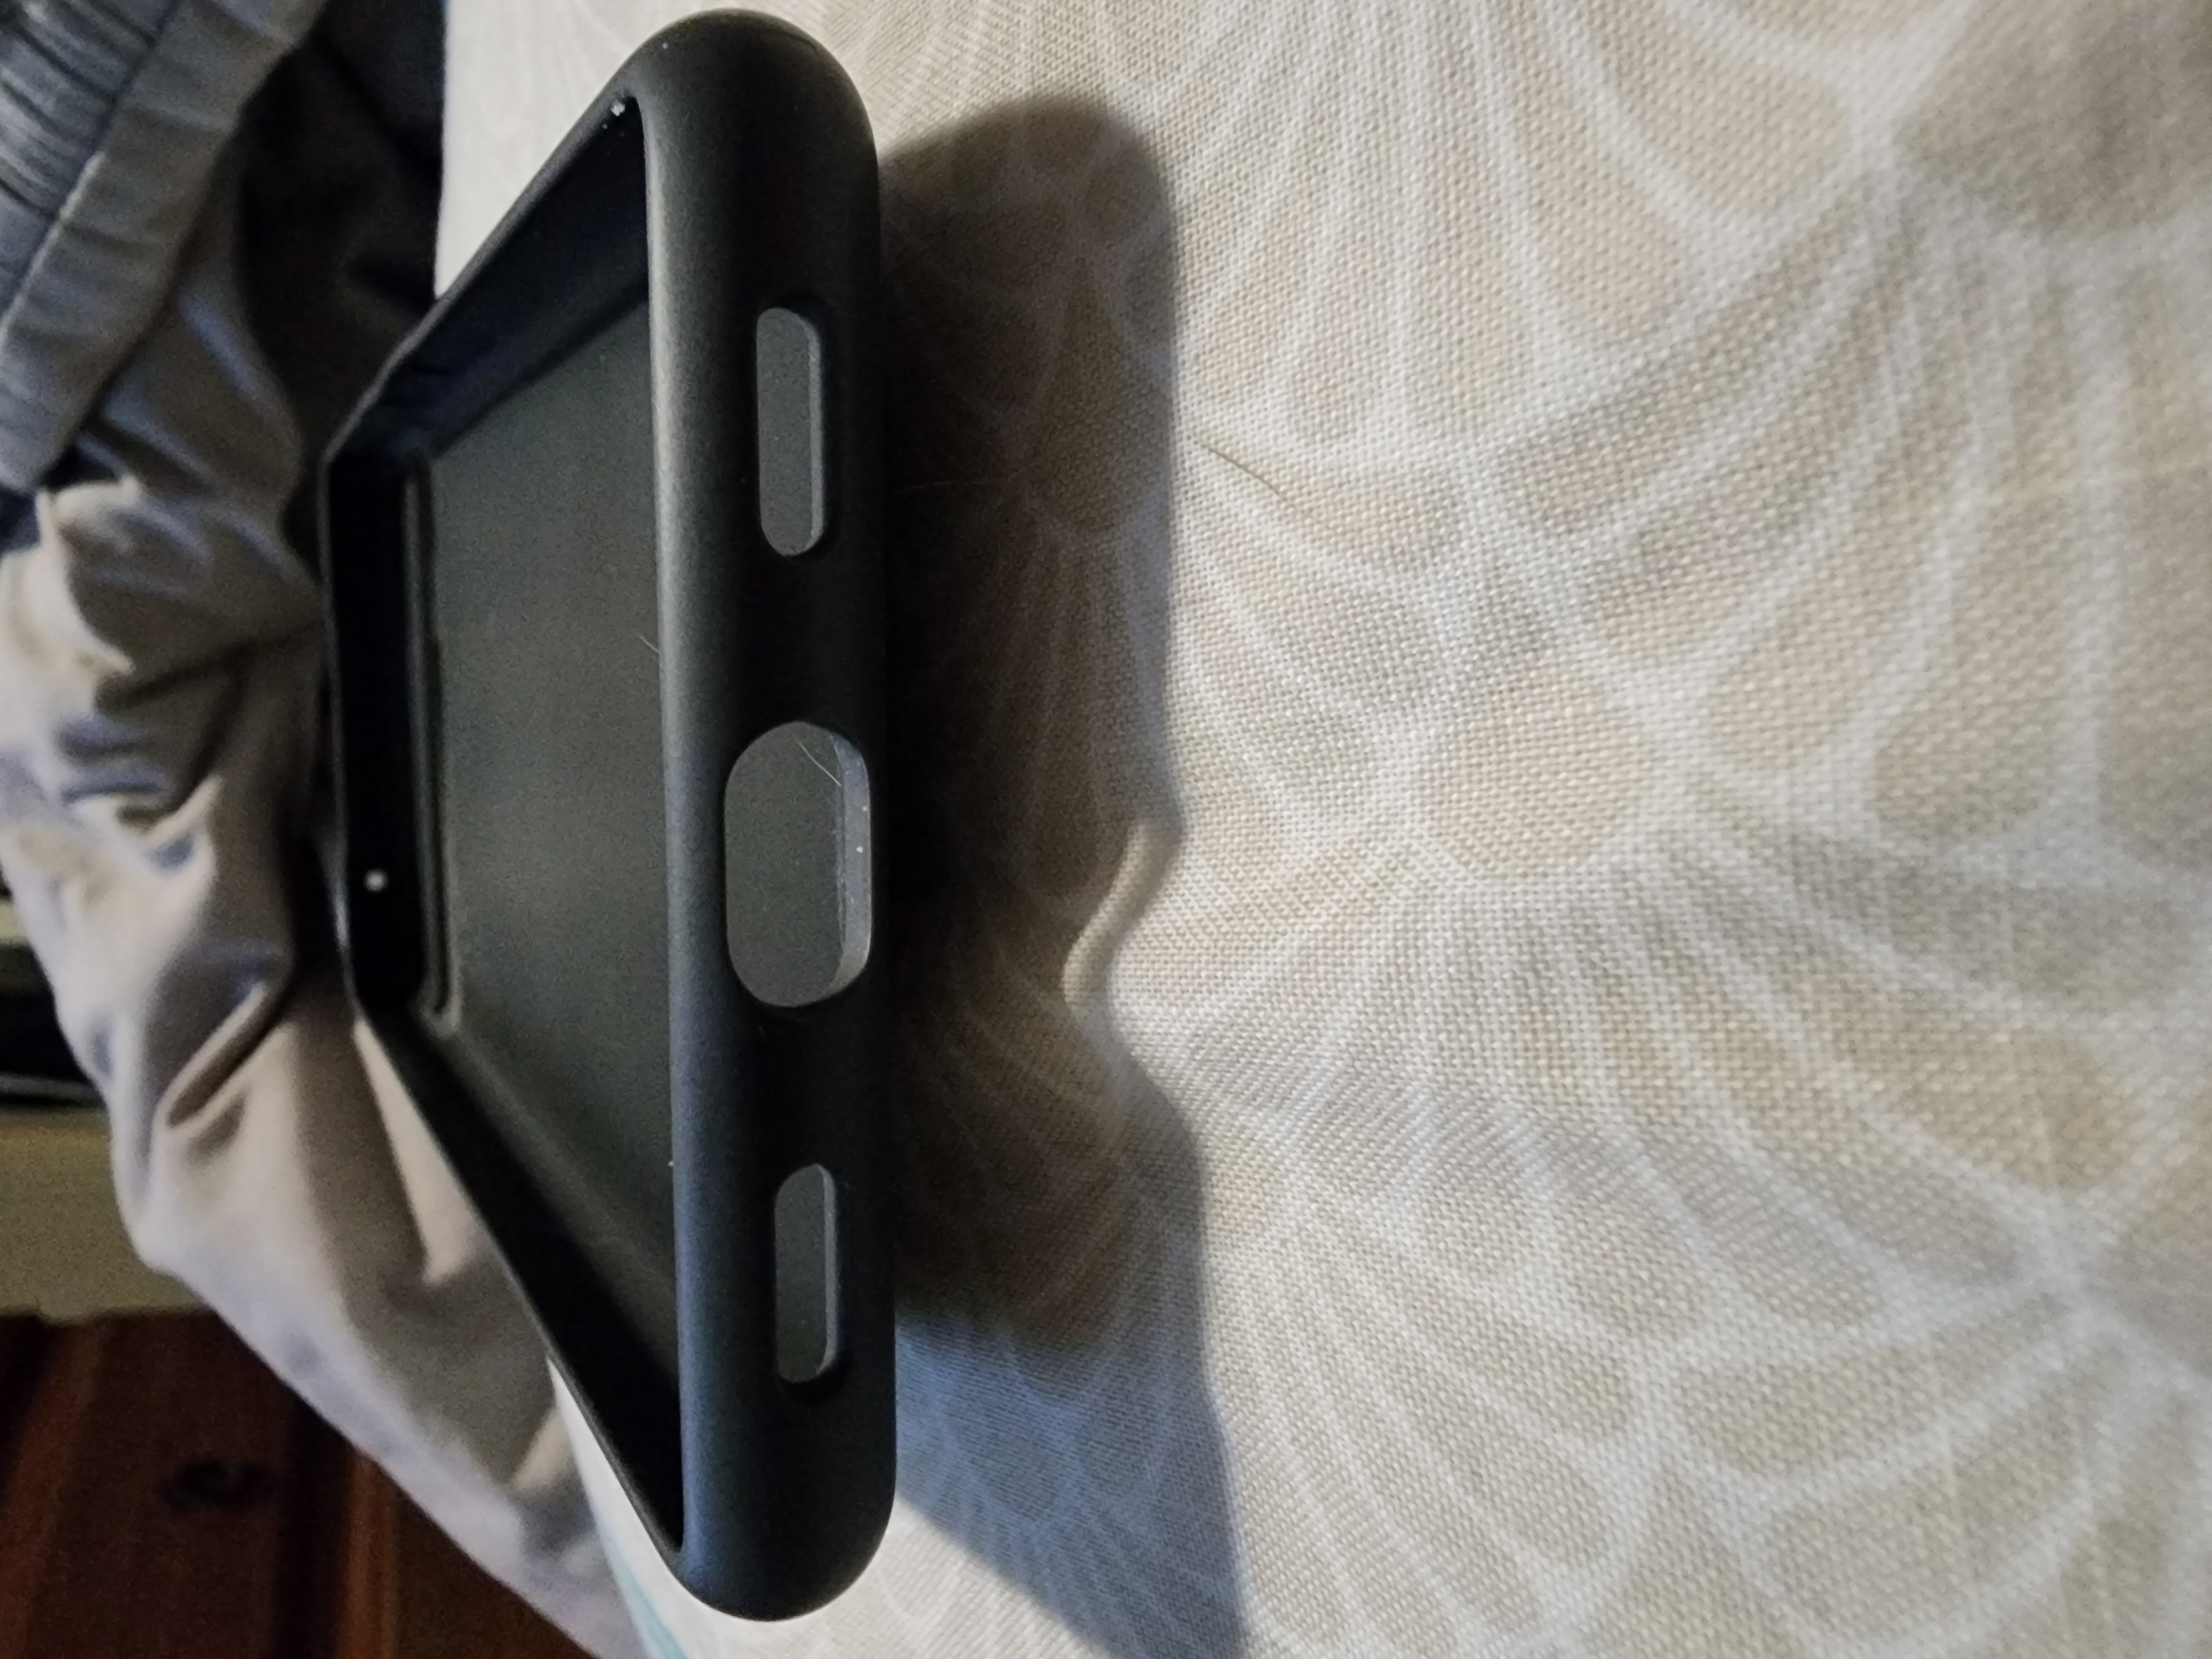 Case showing cut outs for the USB-C and speakers